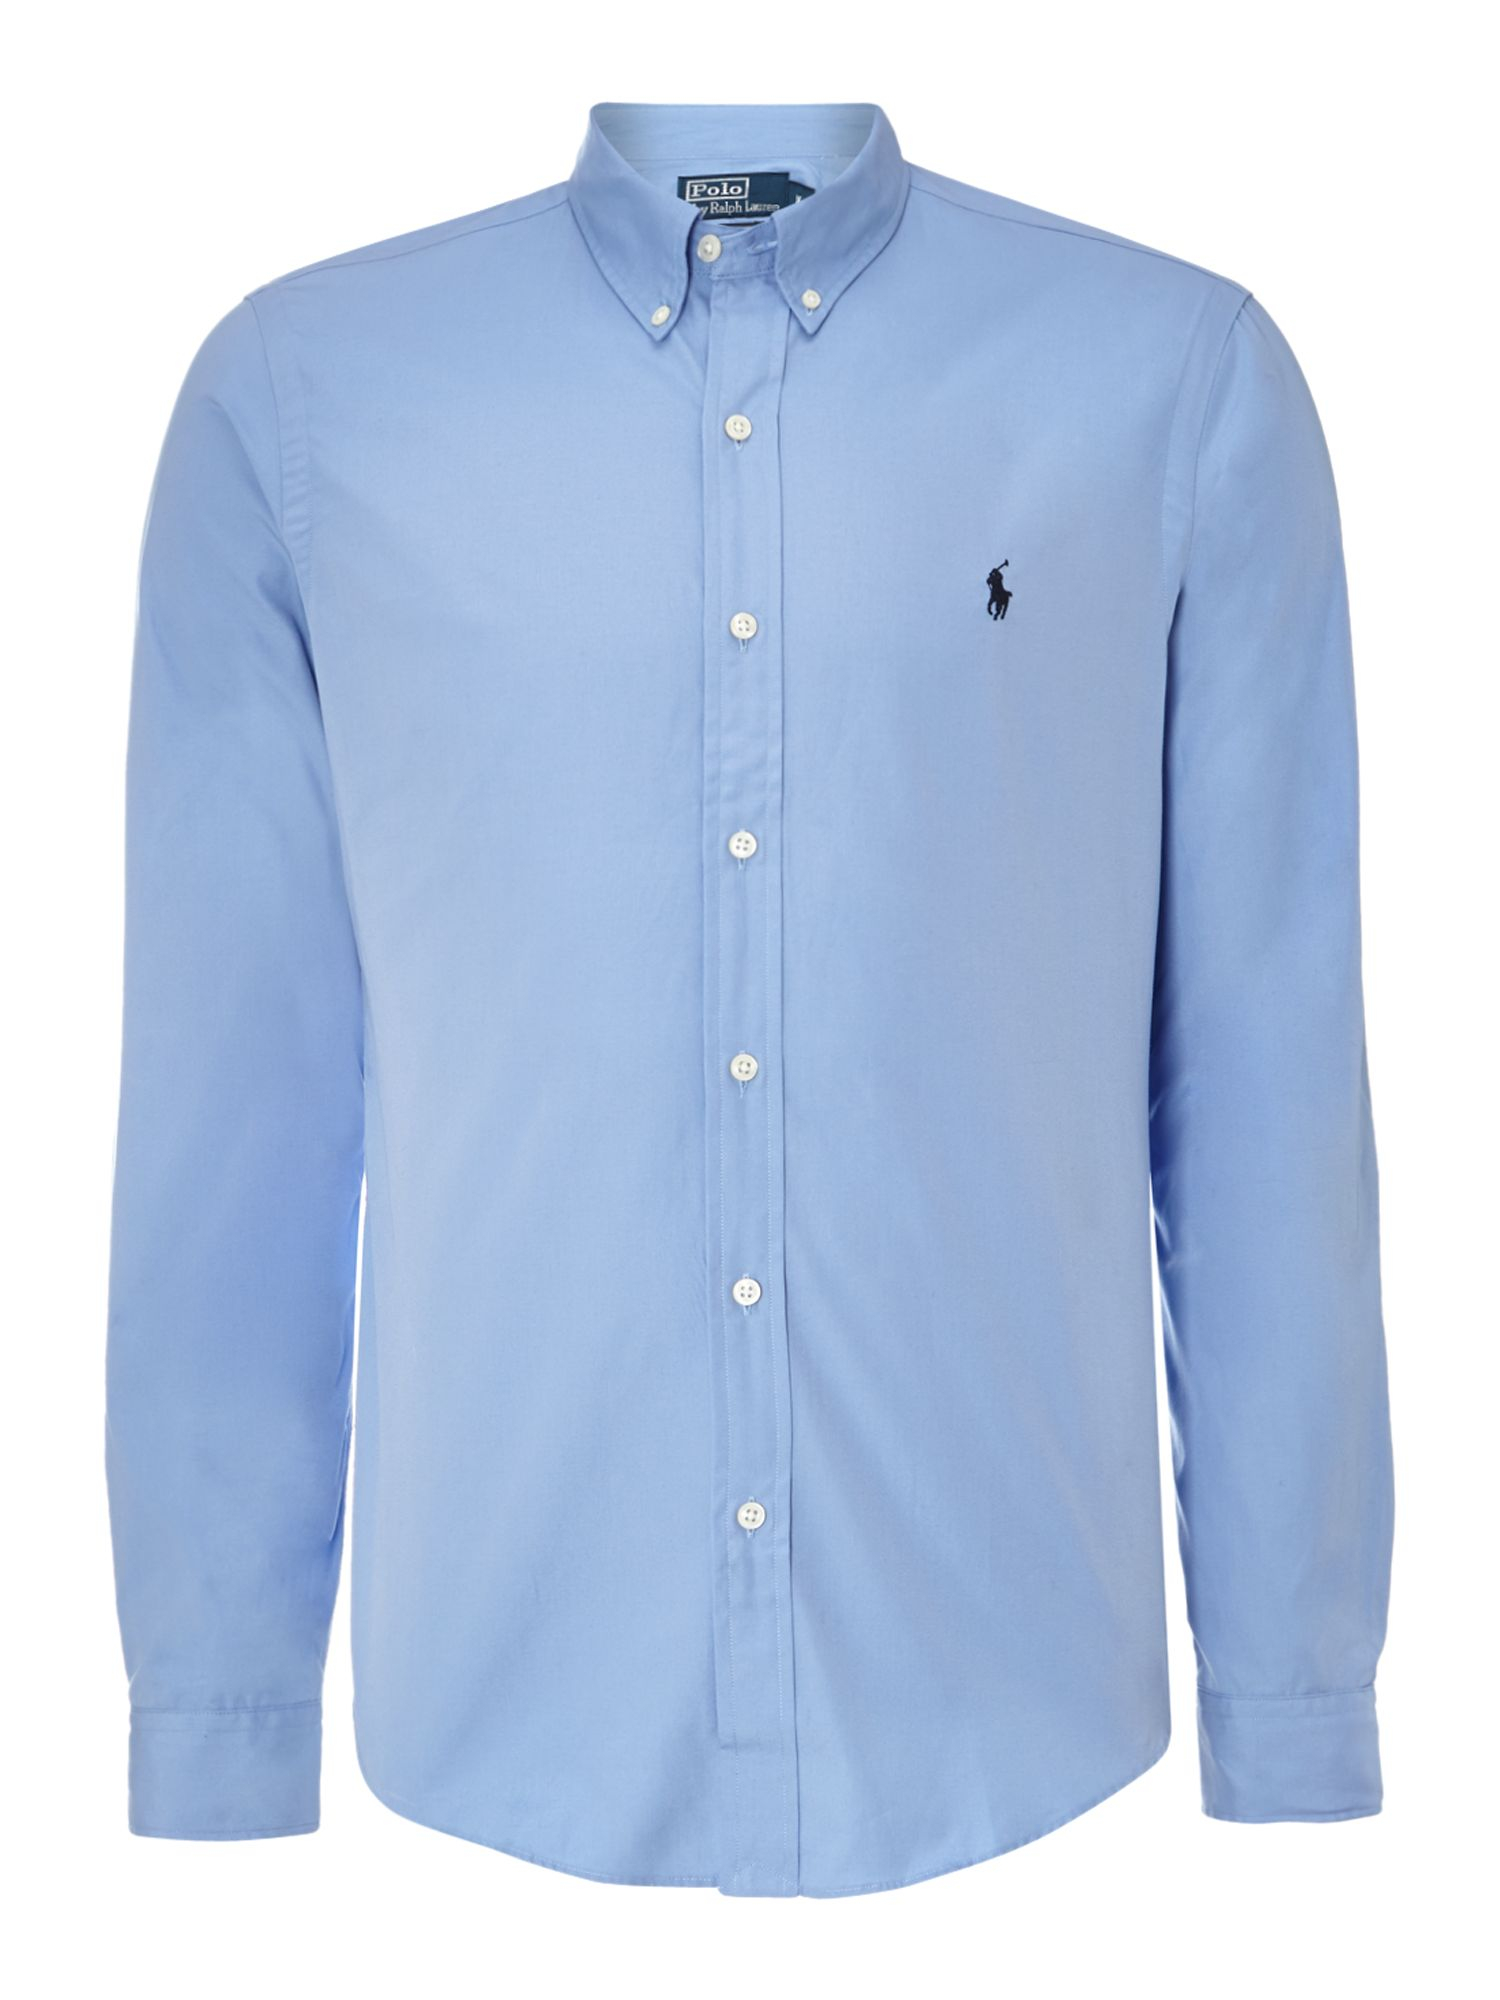 Polo ralph lauren Long Sleeve Slim Fit Broadcloth Shirt in Blue for Men ...